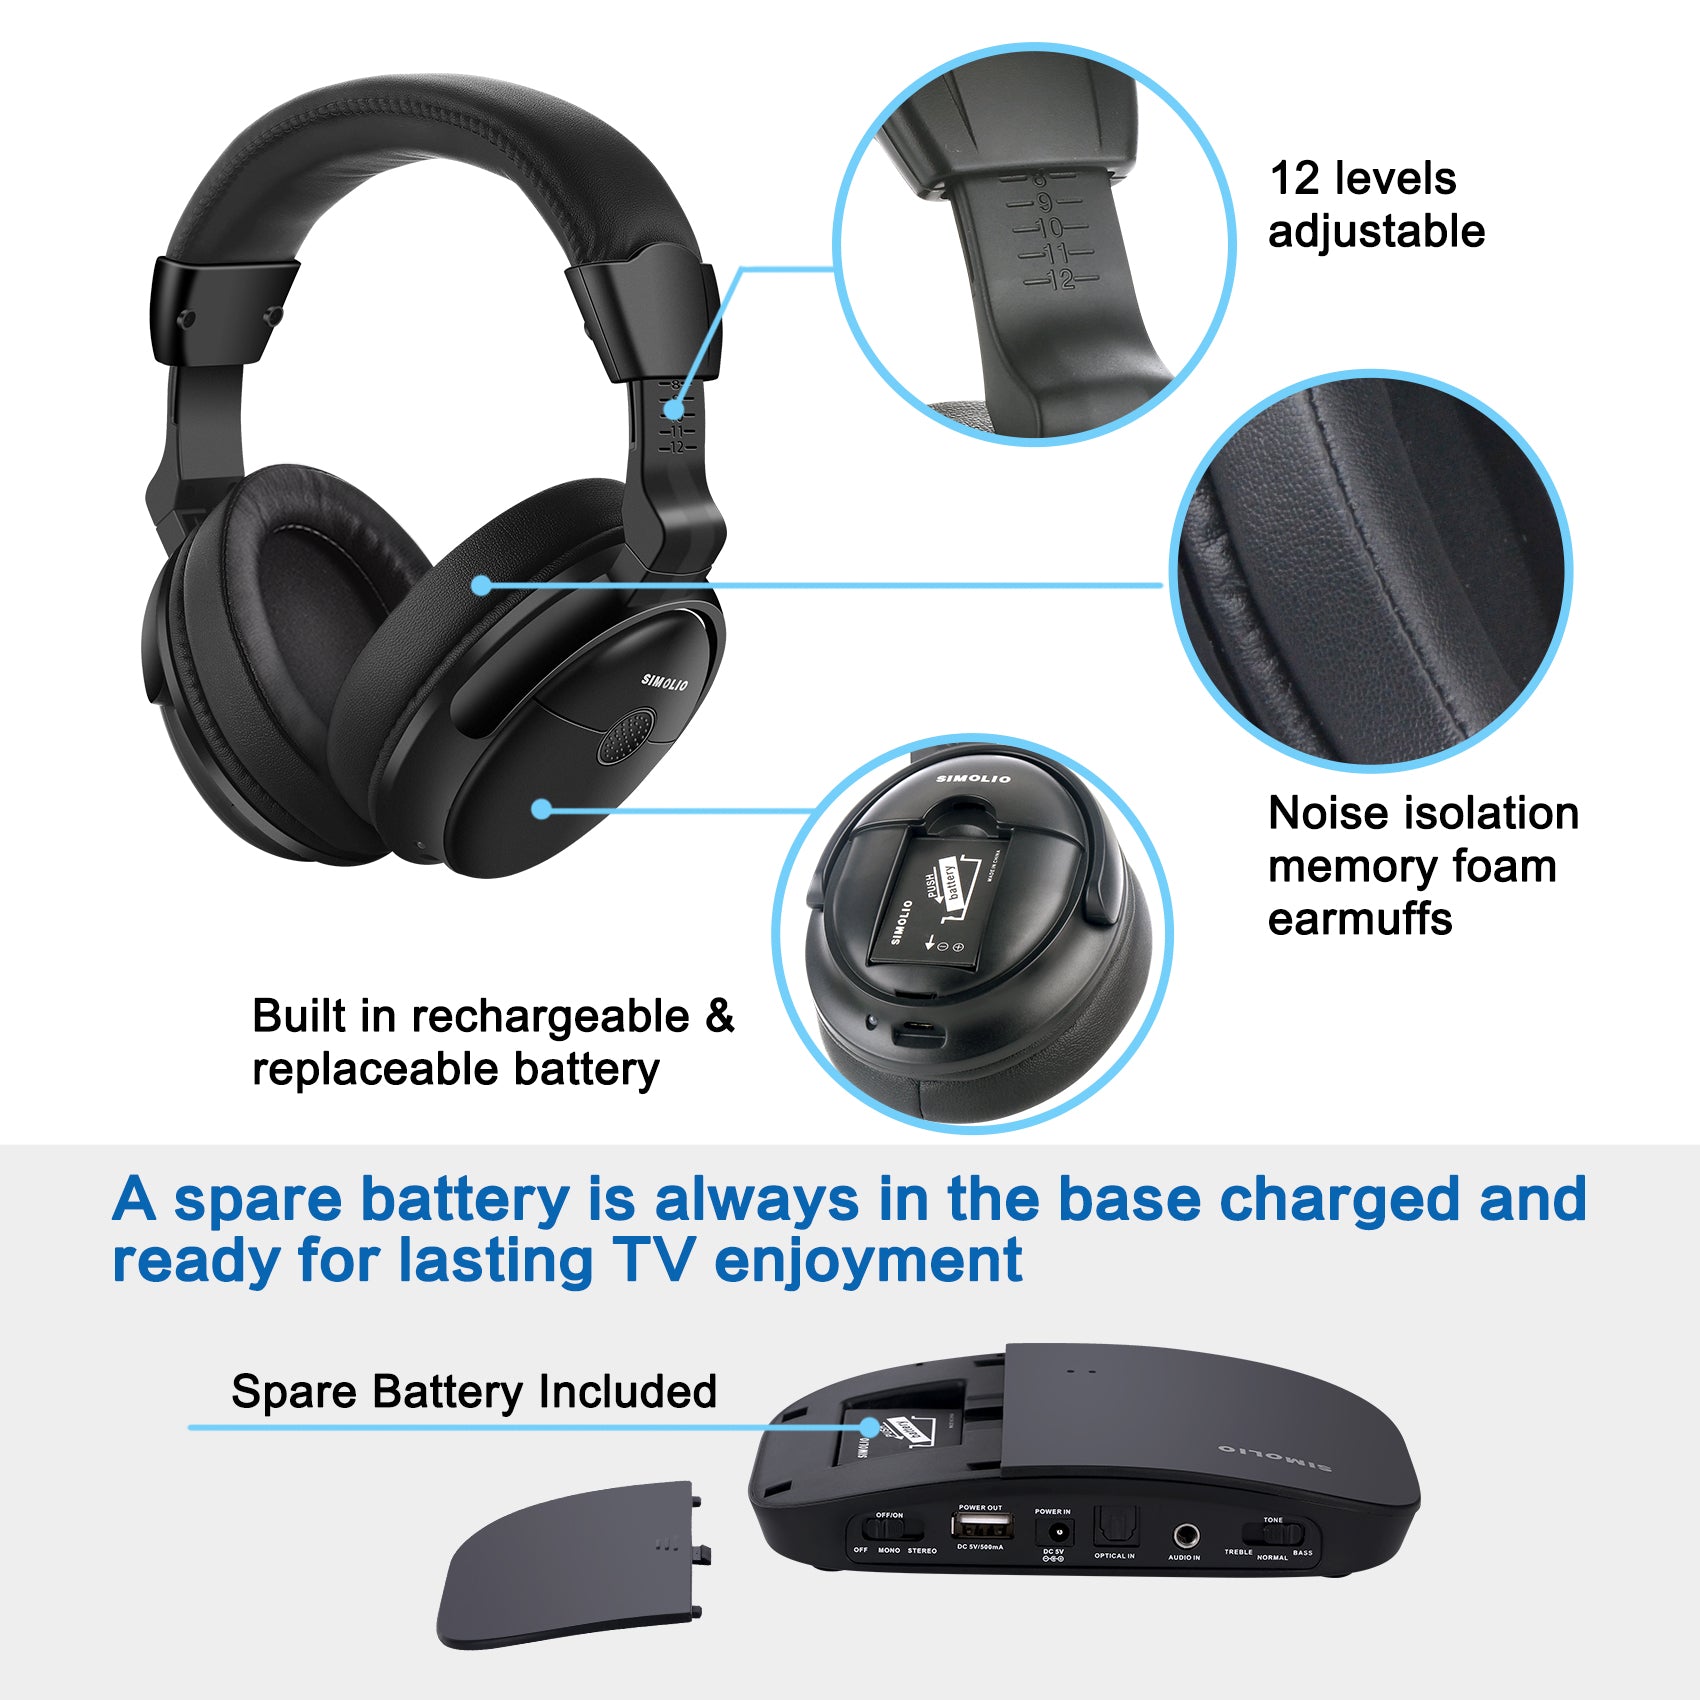 SIMOLIO-wireless-tv-headphones-for-seniors-and-hard-of-hearing-SM-825DPRO-spare-battery